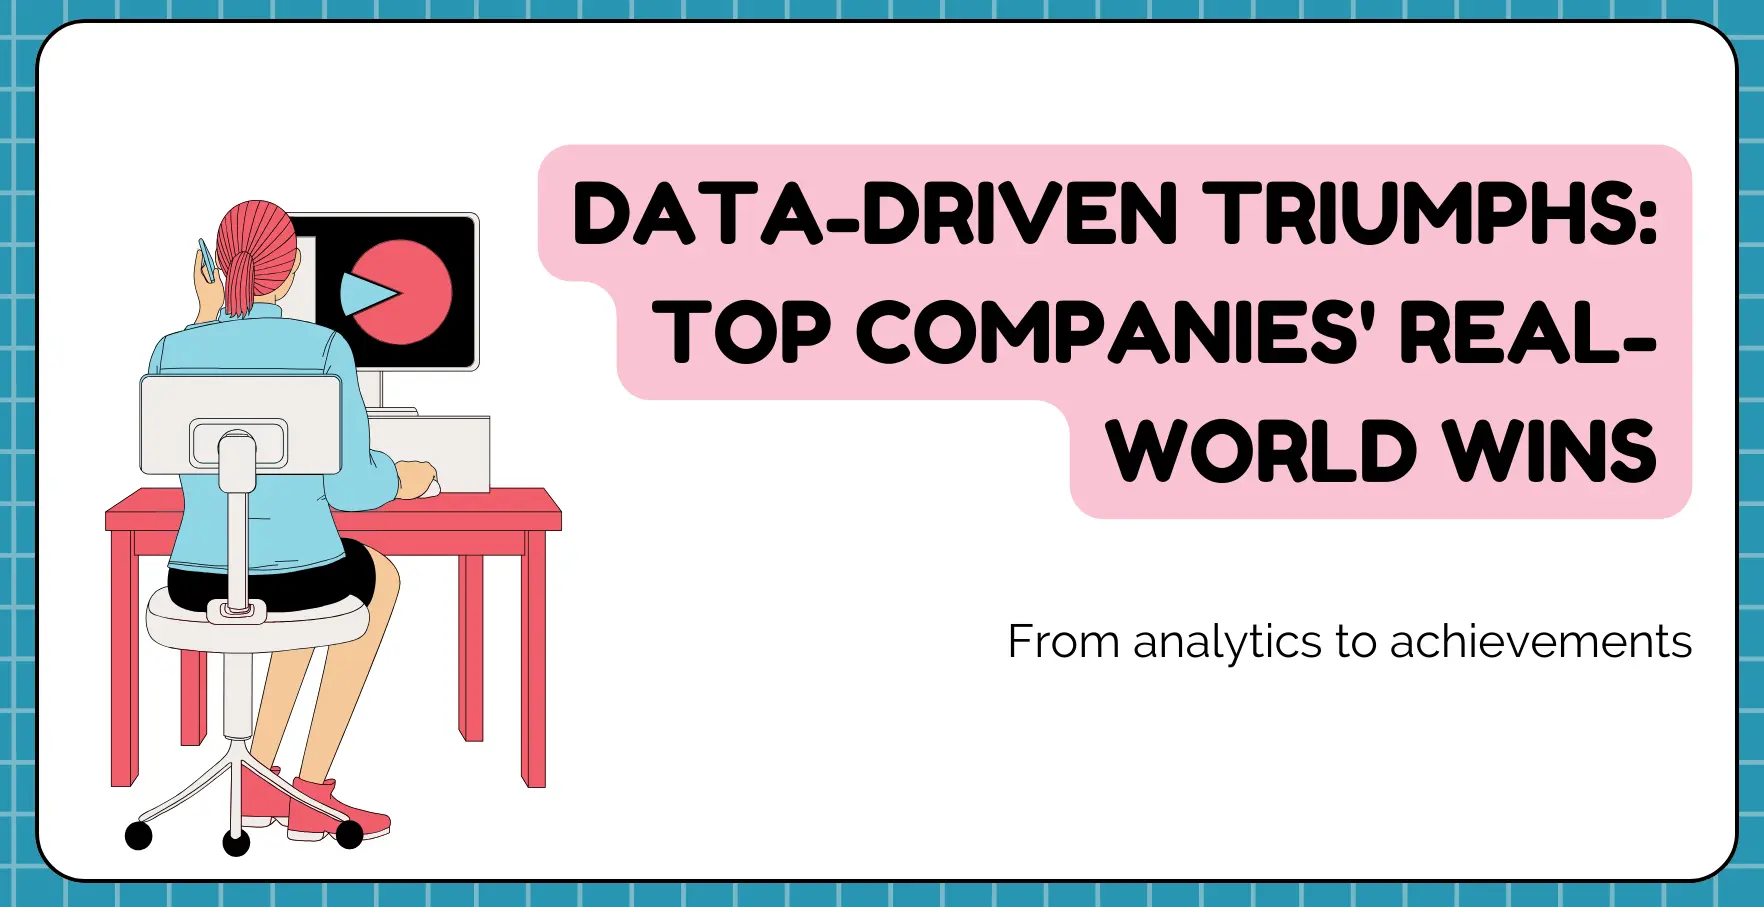 Data-Driven Triumphs Top Companies' Real-World Wins